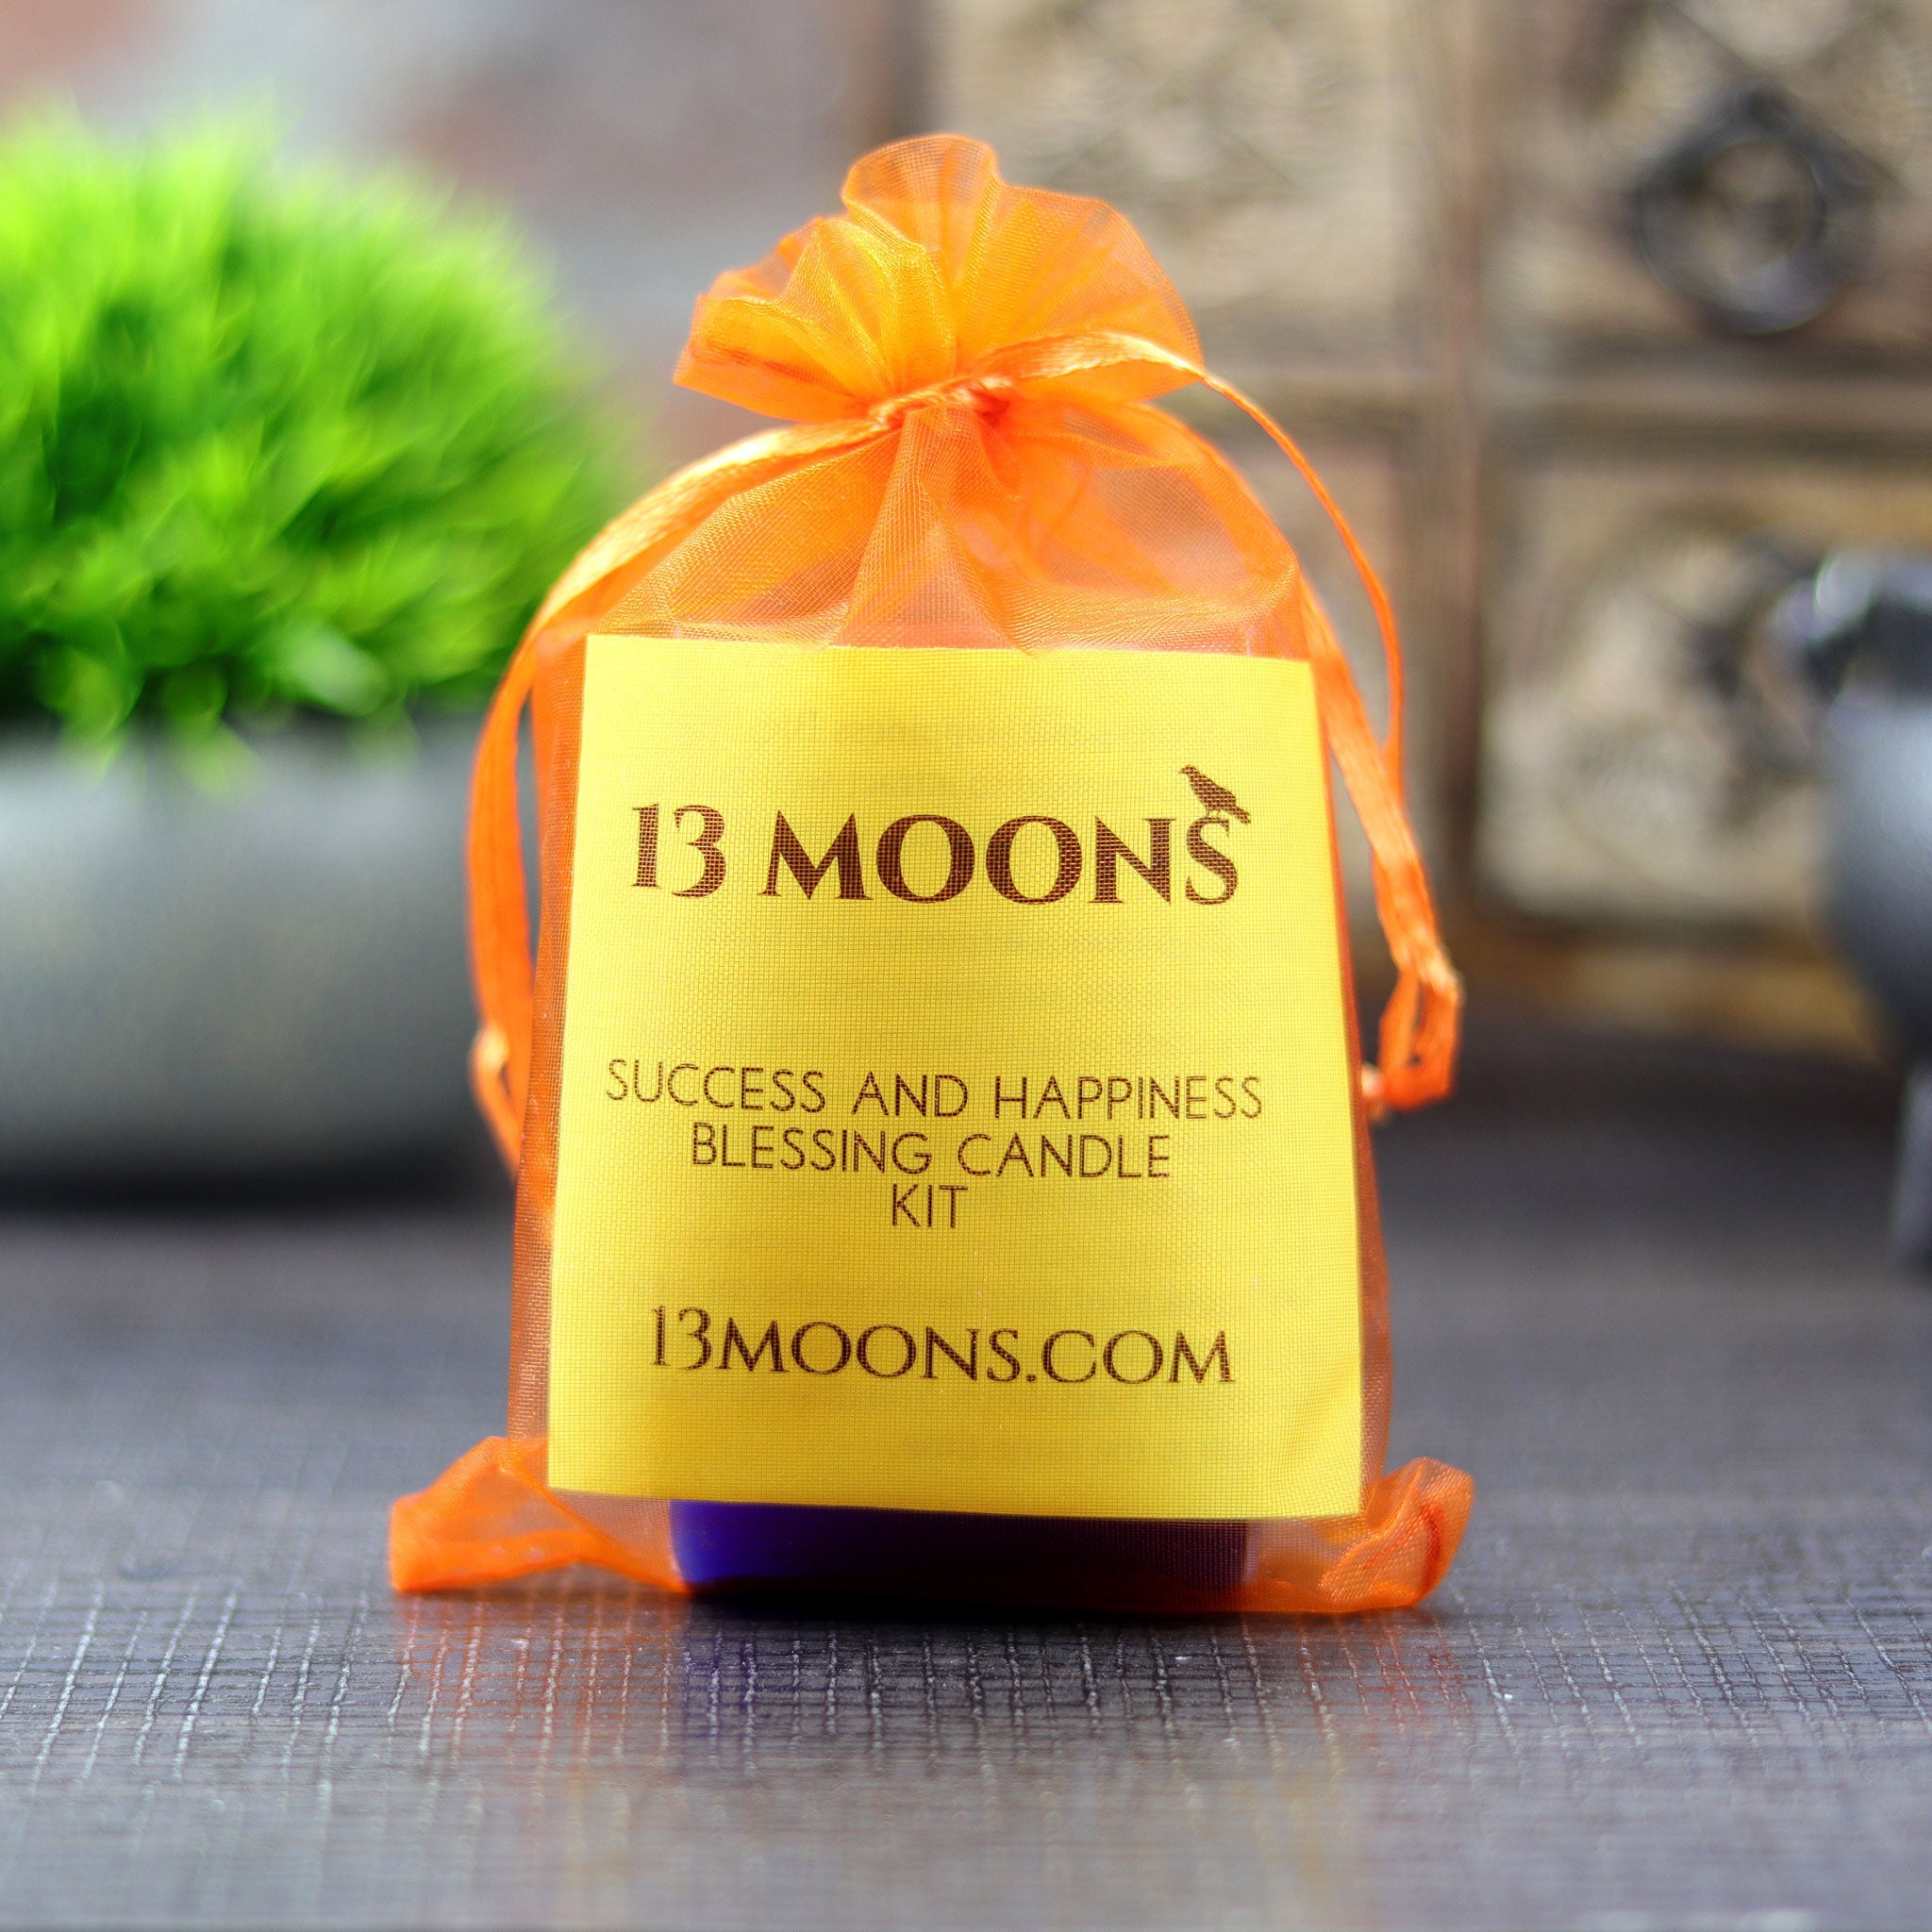 Success and Happiness Blessing Candle Kit - 13 Moons